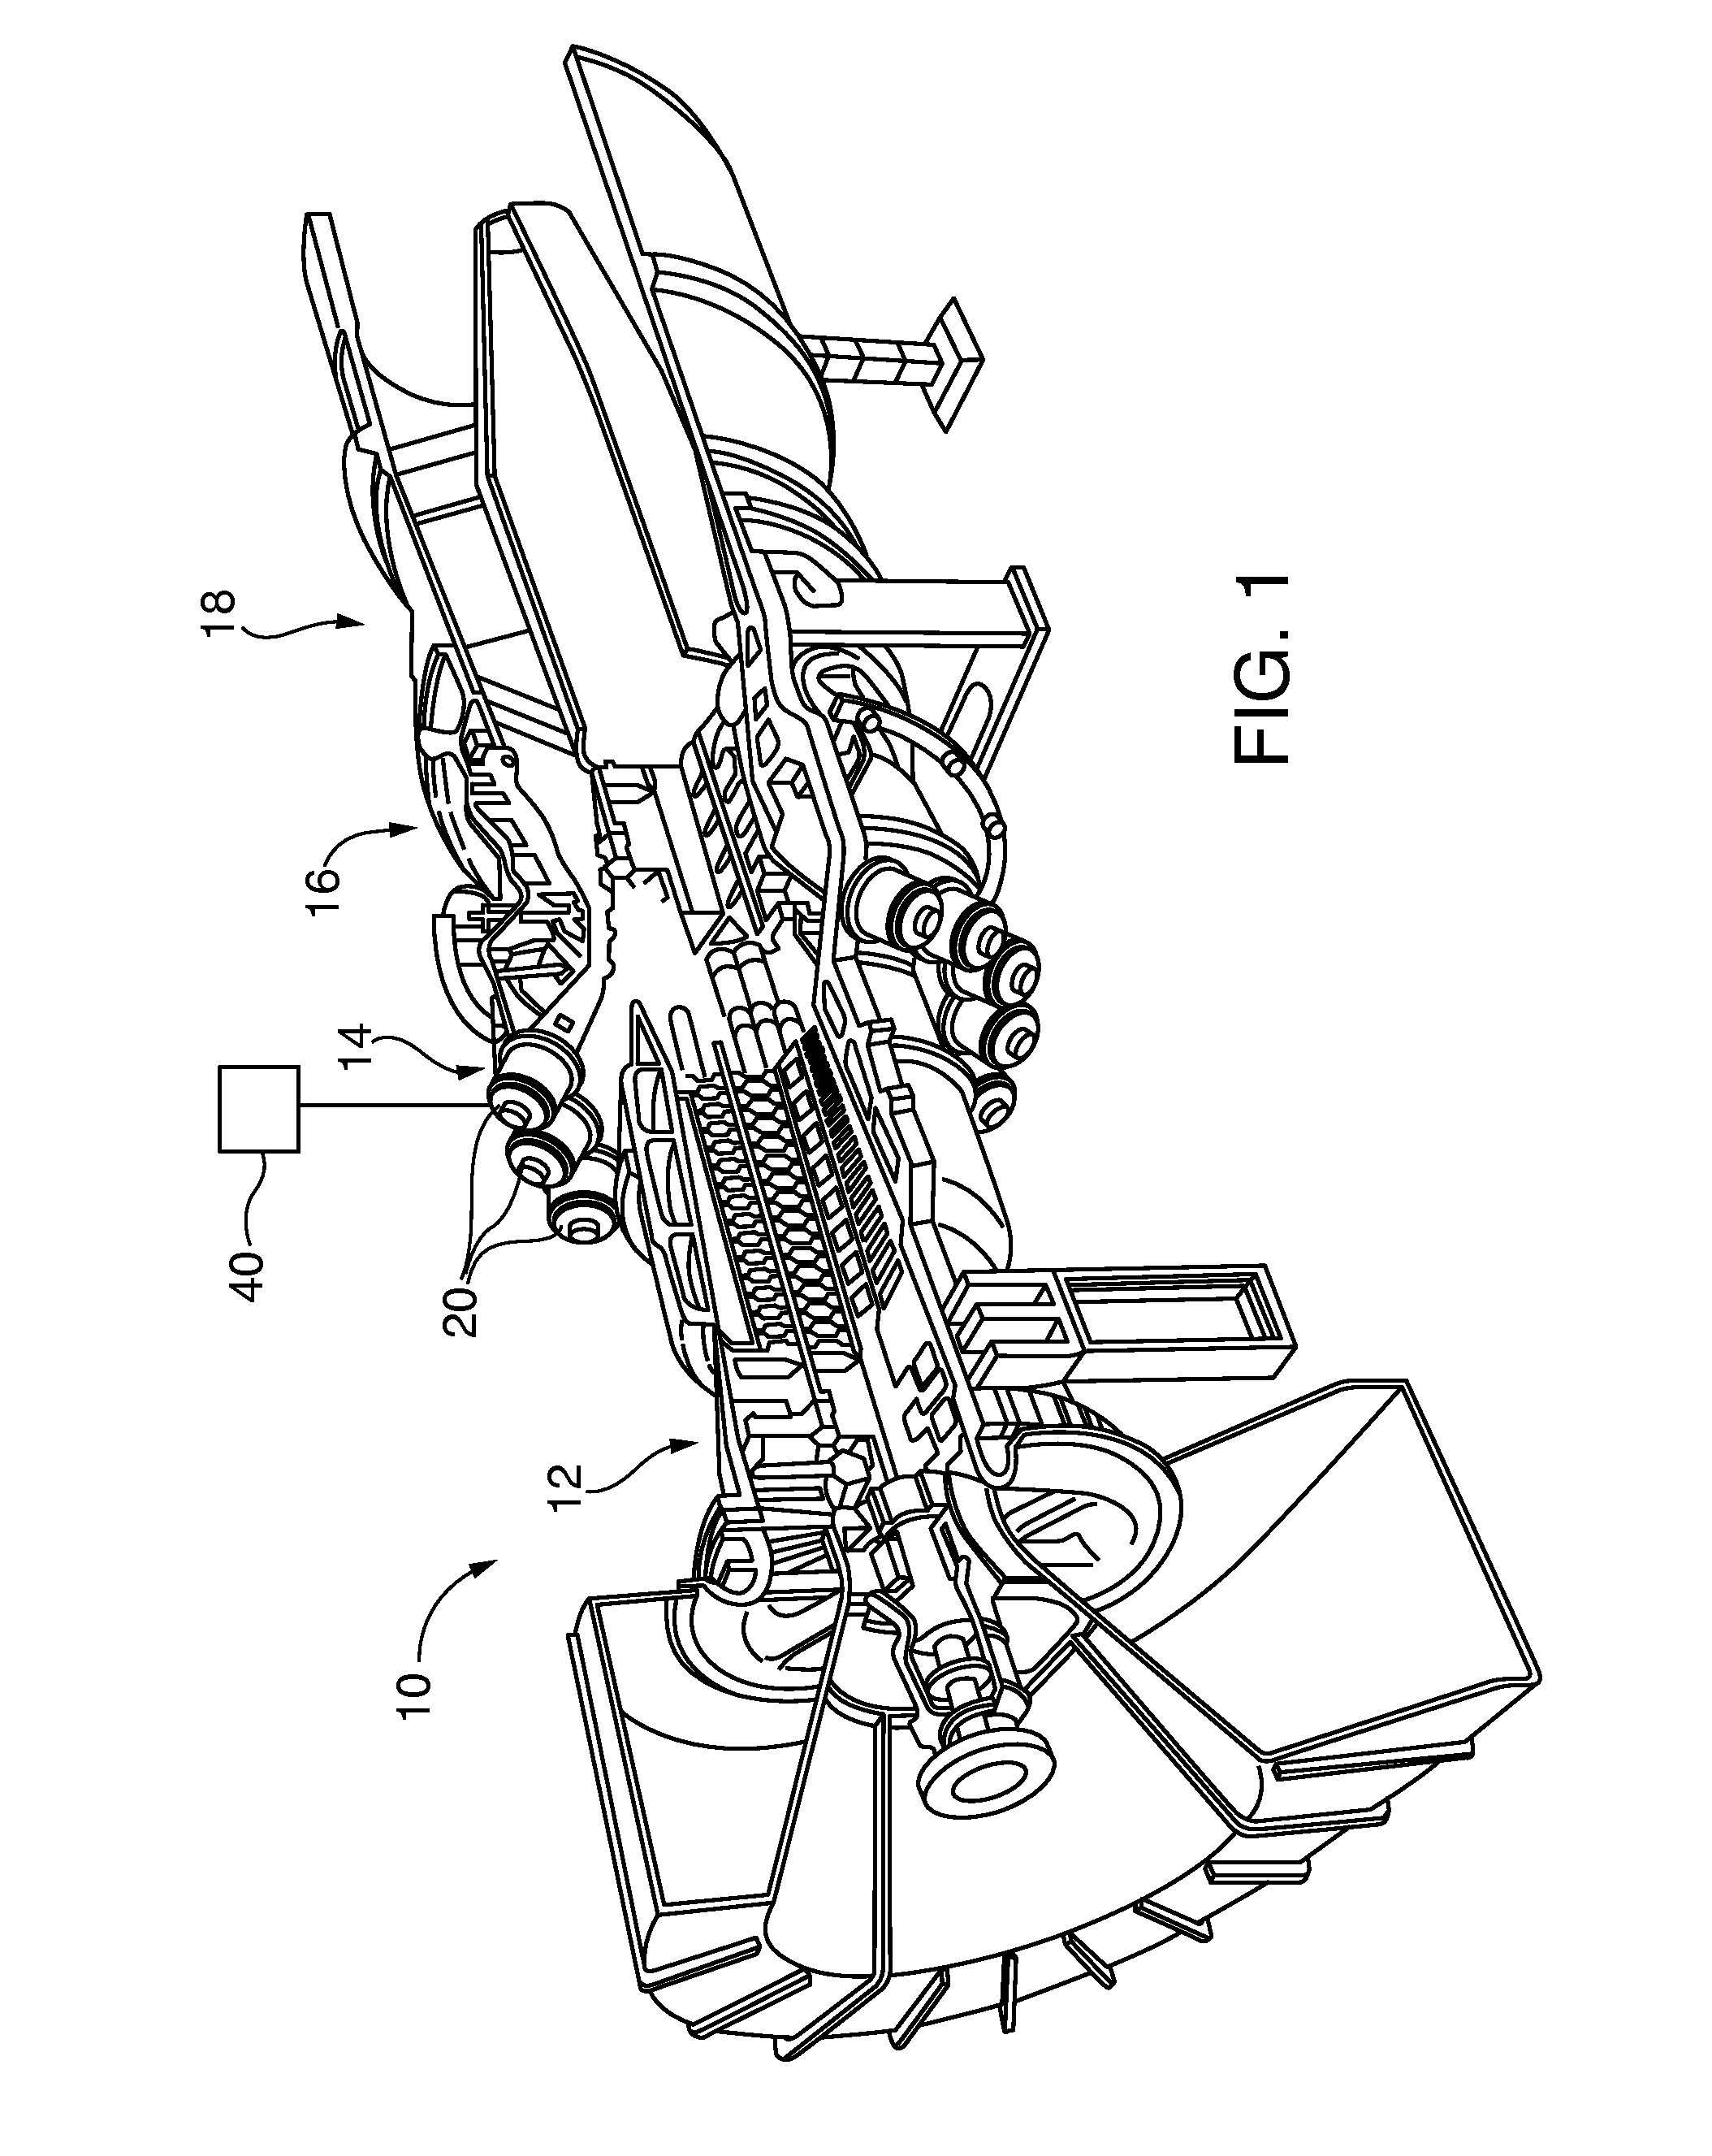 Parameter distribution mapping in a gas turbine engine